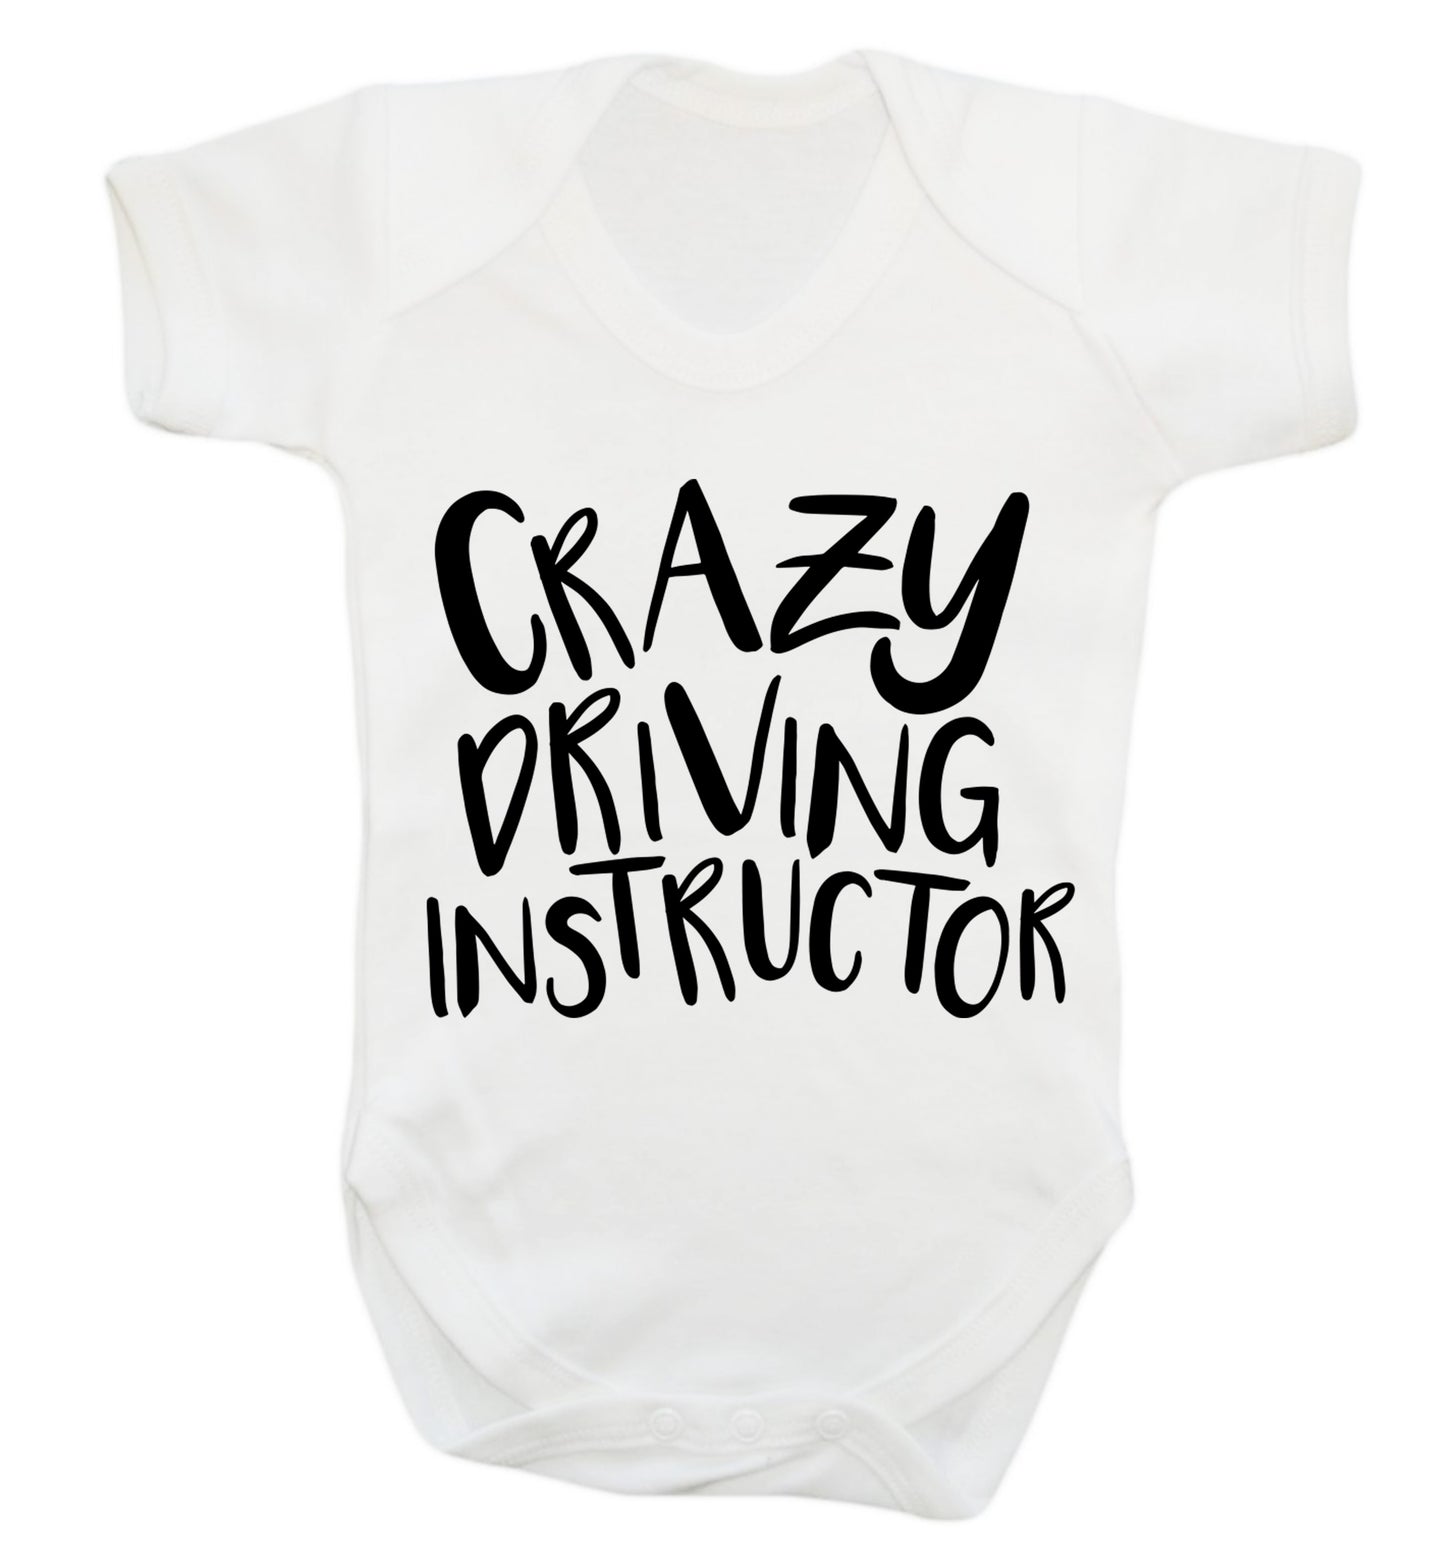 Crazy driving instructor Baby Vest white 18-24 months